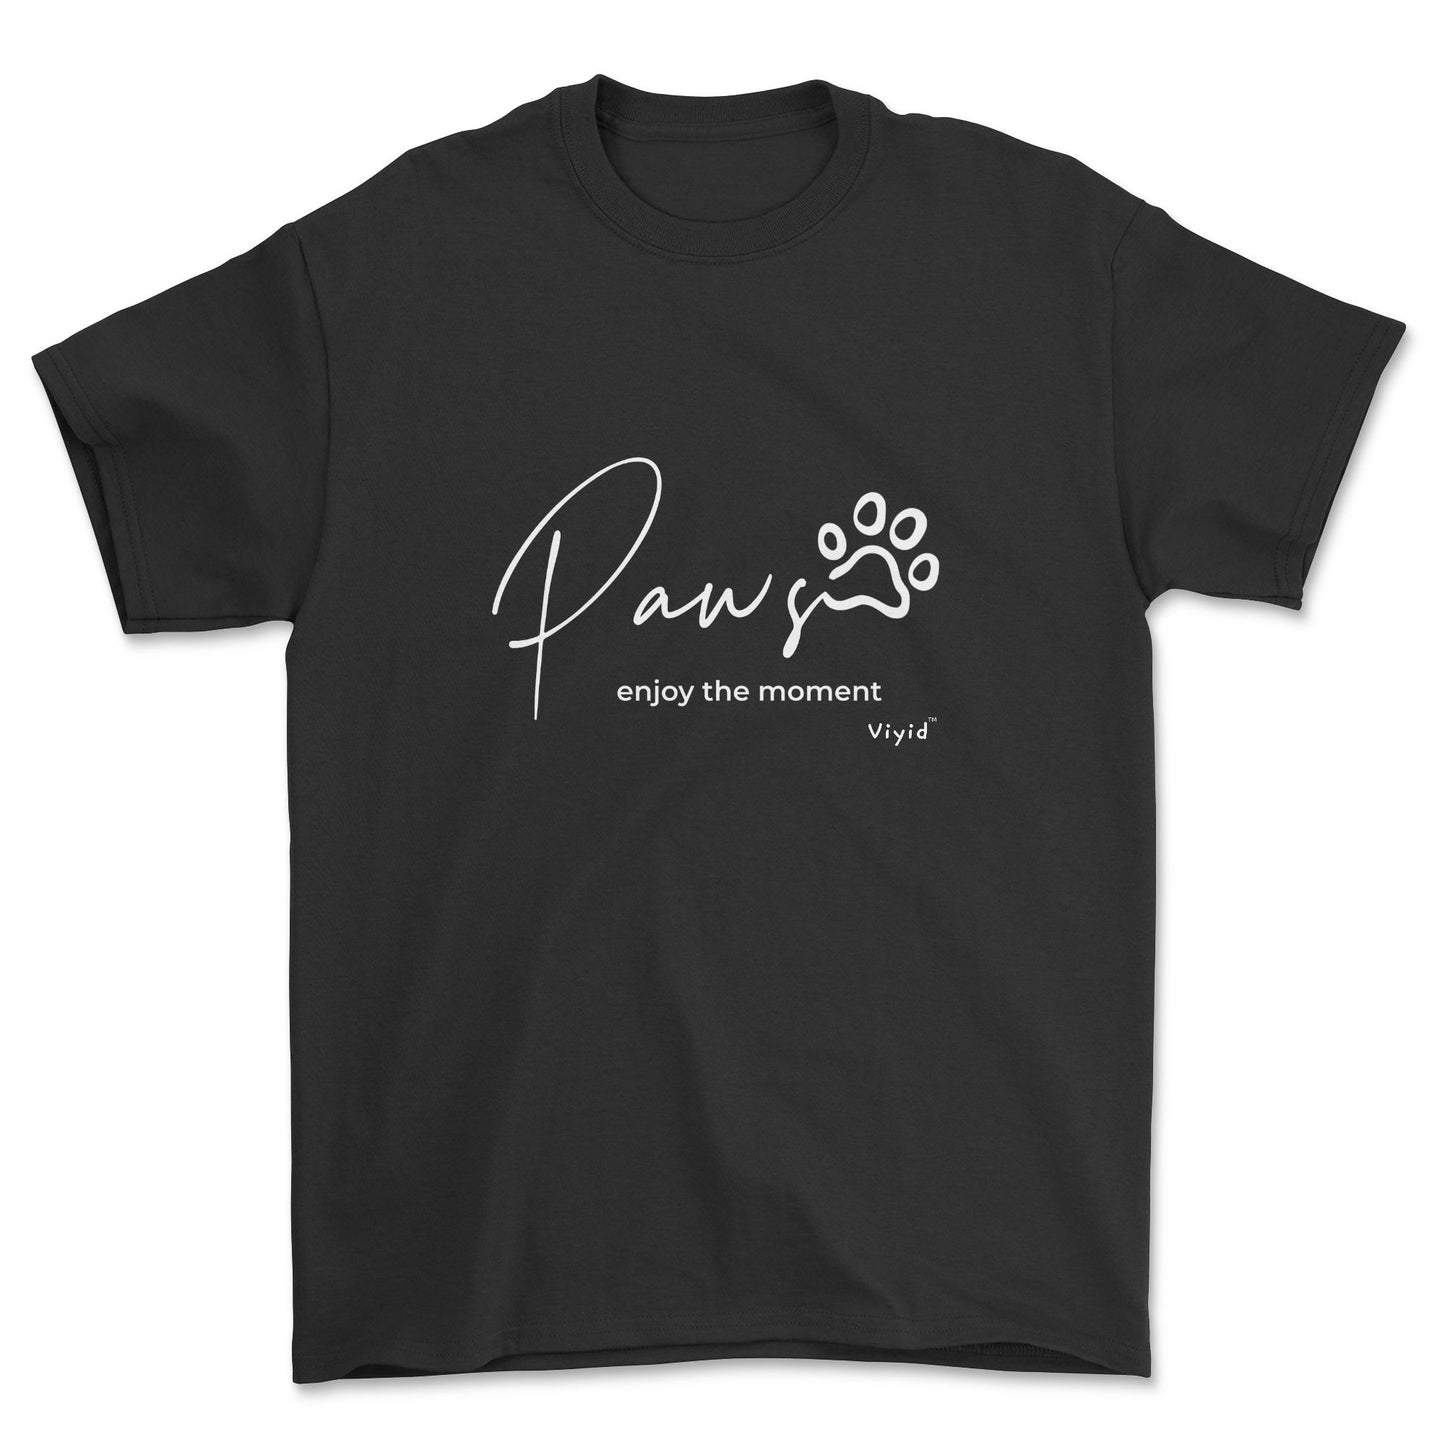 paws enjoy the moment youth t-shirt black